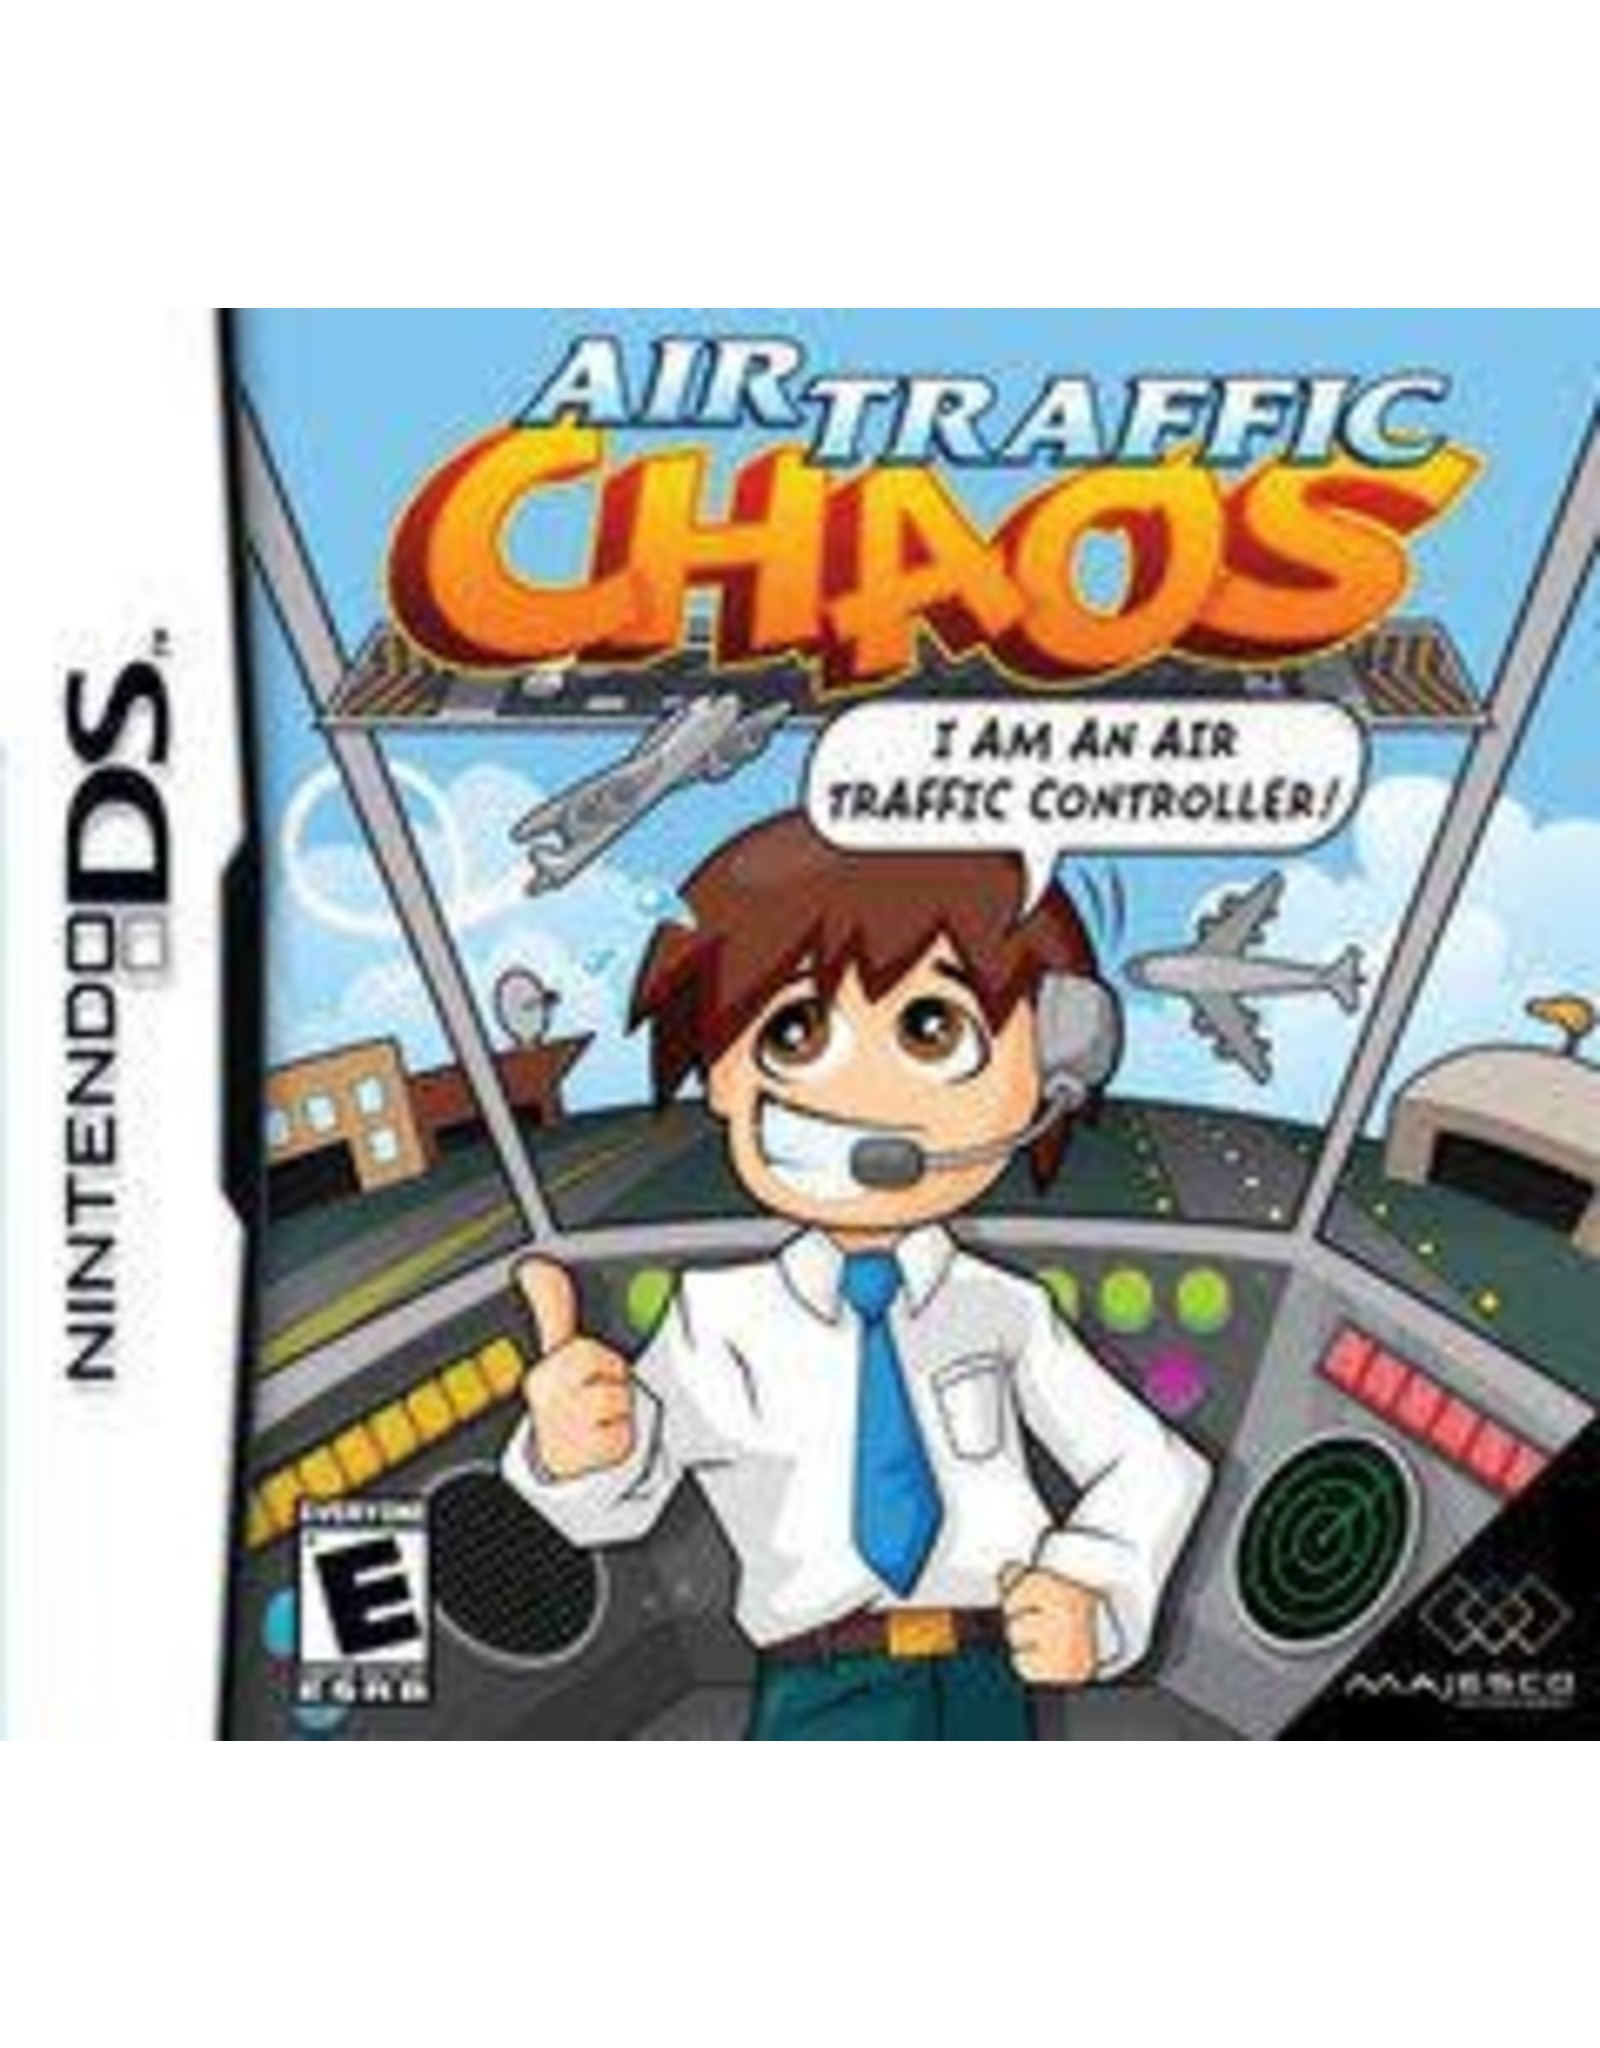 Nintendo DS Air Traffic Chaos (Cart Only)